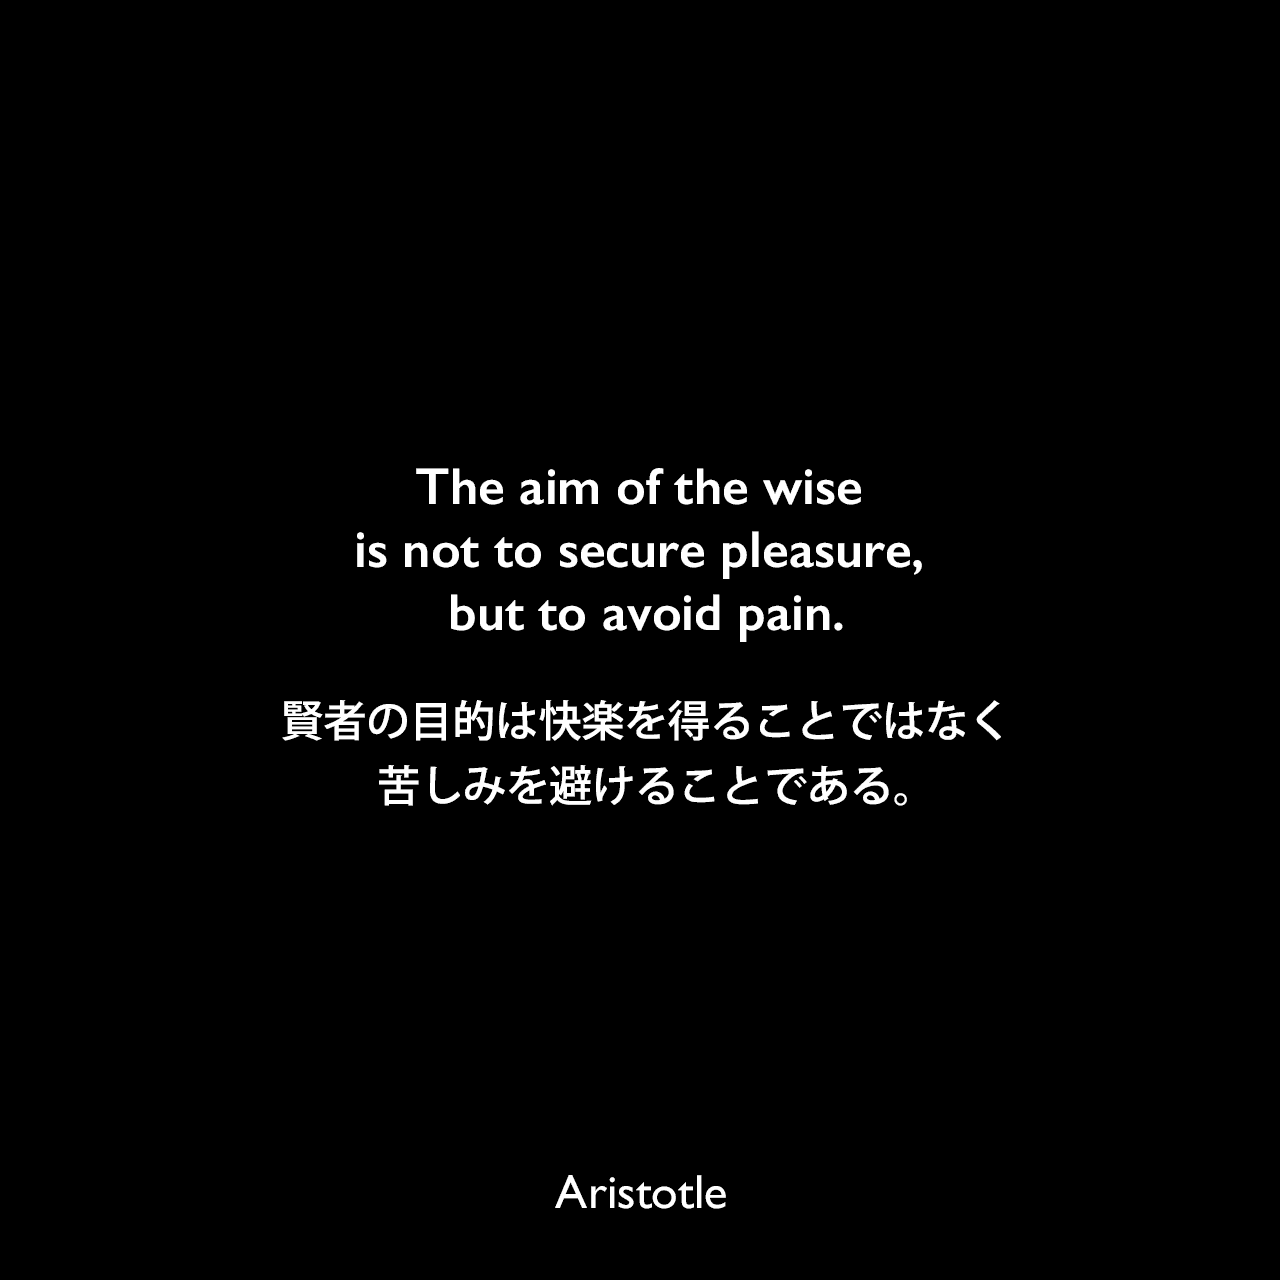 The aim of the wise is not to secure pleasure, but to avoid pain.賢者の目的は快楽を得ることではなく、苦しみを避けることである。Aristotle